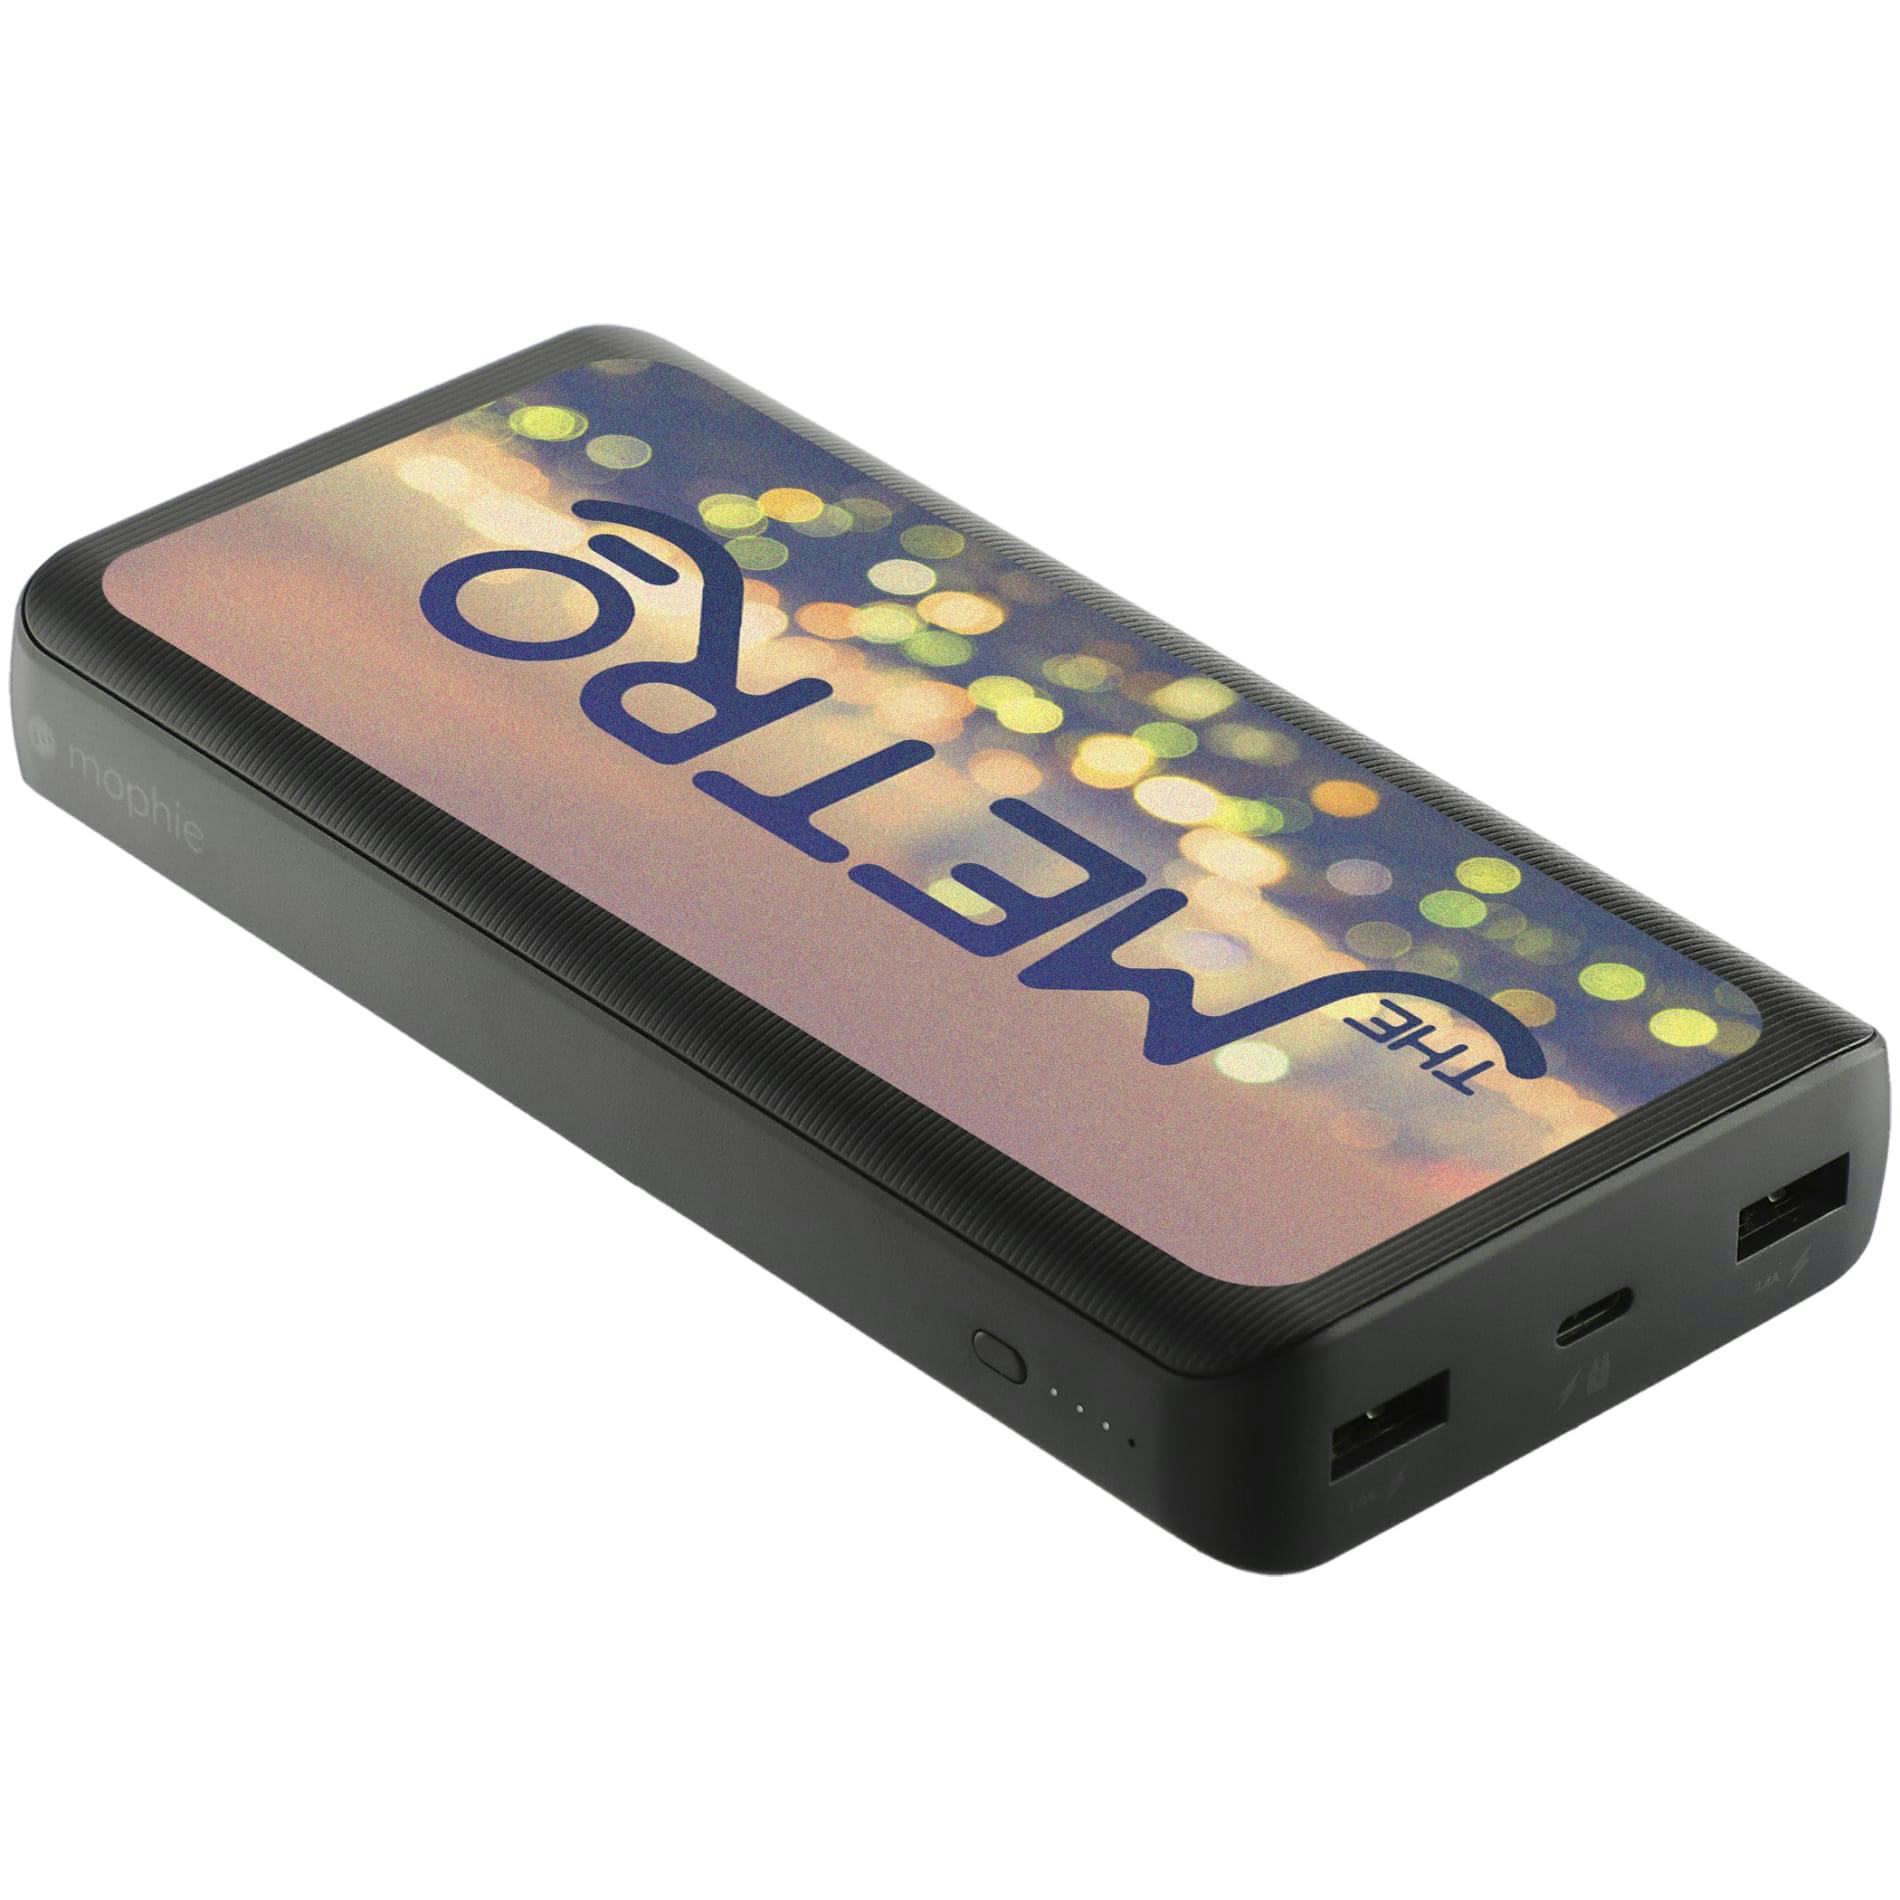 mophie® Power Boost 20,000 mAh Power Bank - additional Image 1